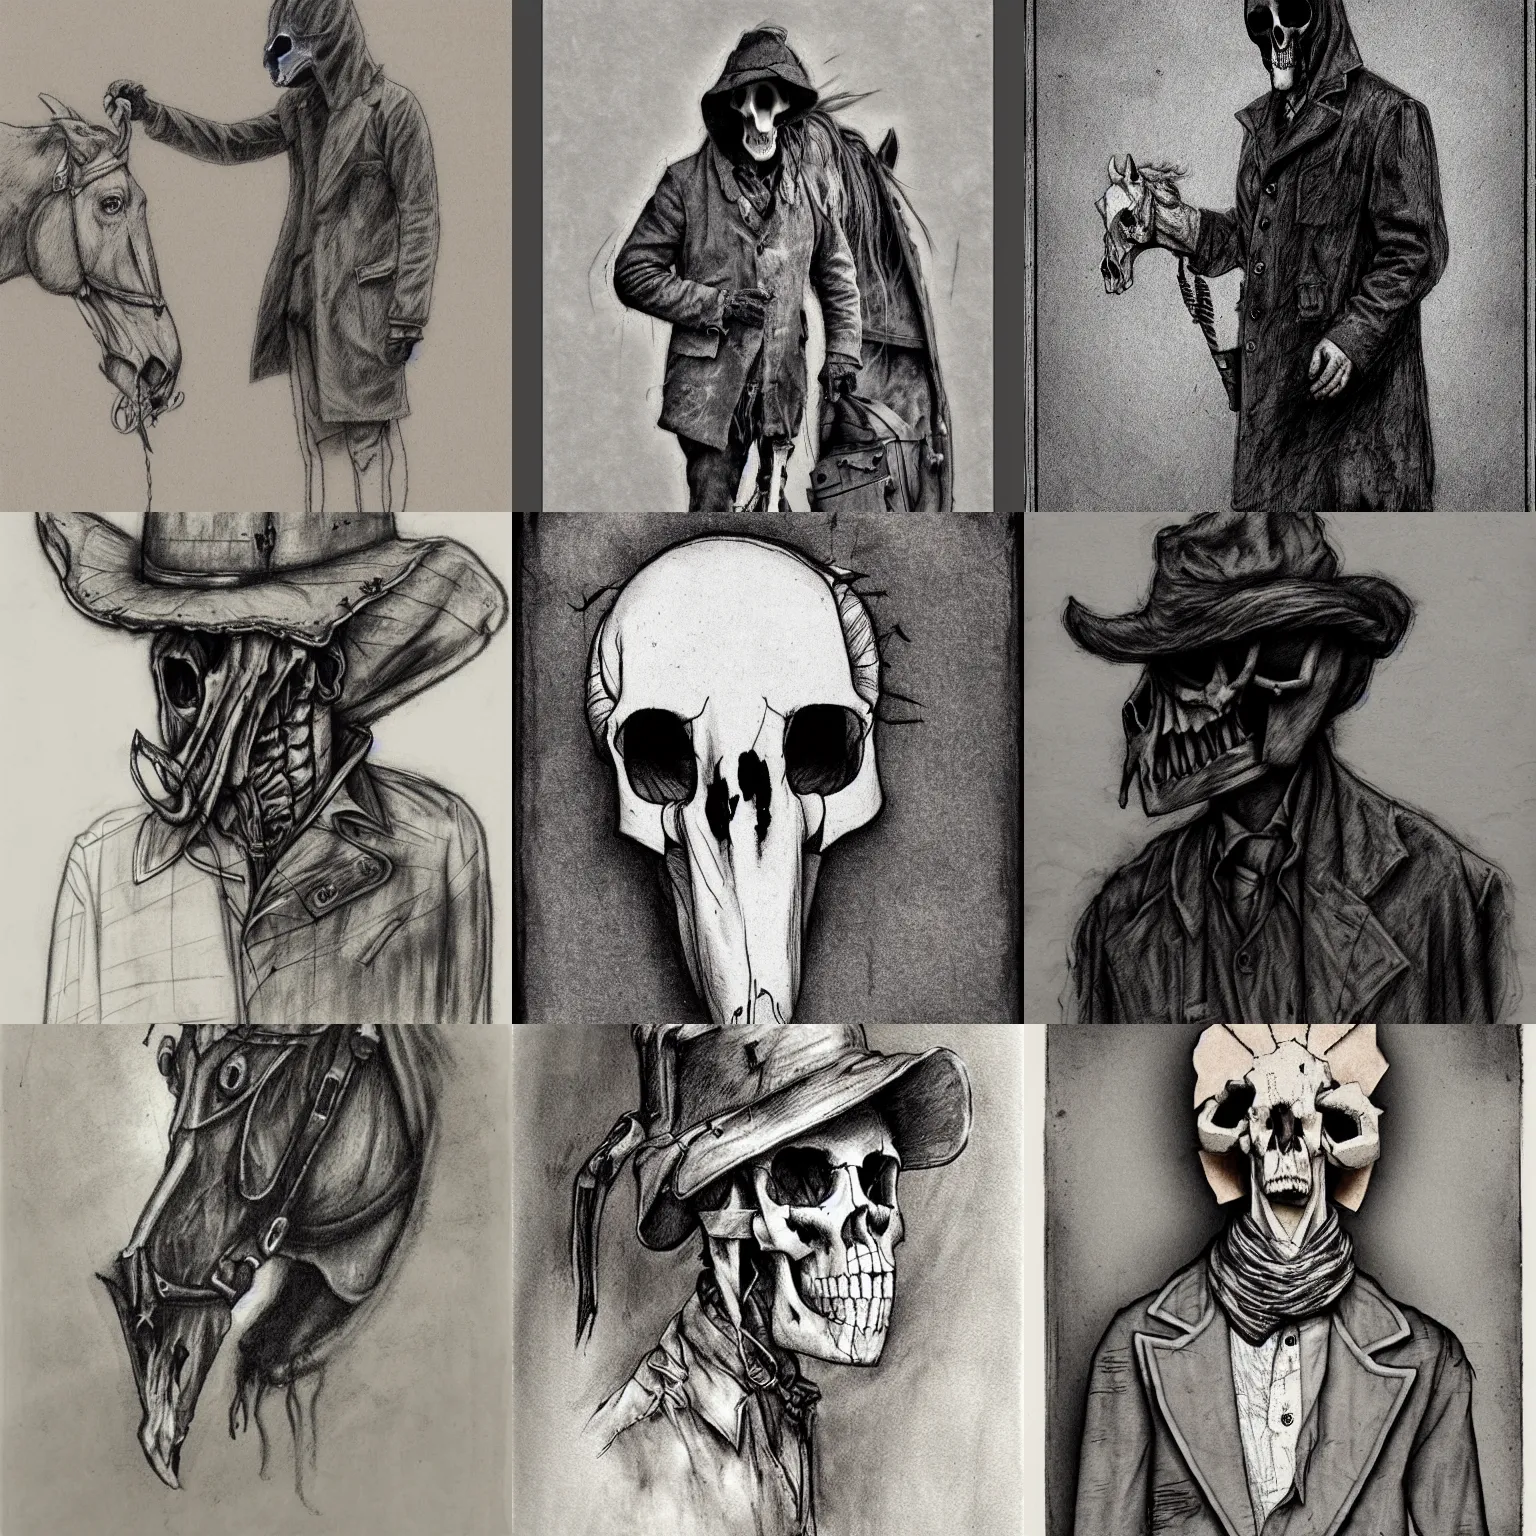 Prompt: postman with horse skull face wearing tattered overcoat, inks, charcoal, crosshatching, luminist, tonalist, monochrome, coarse, portrait, linework, contrast, dust, scattering, leaves